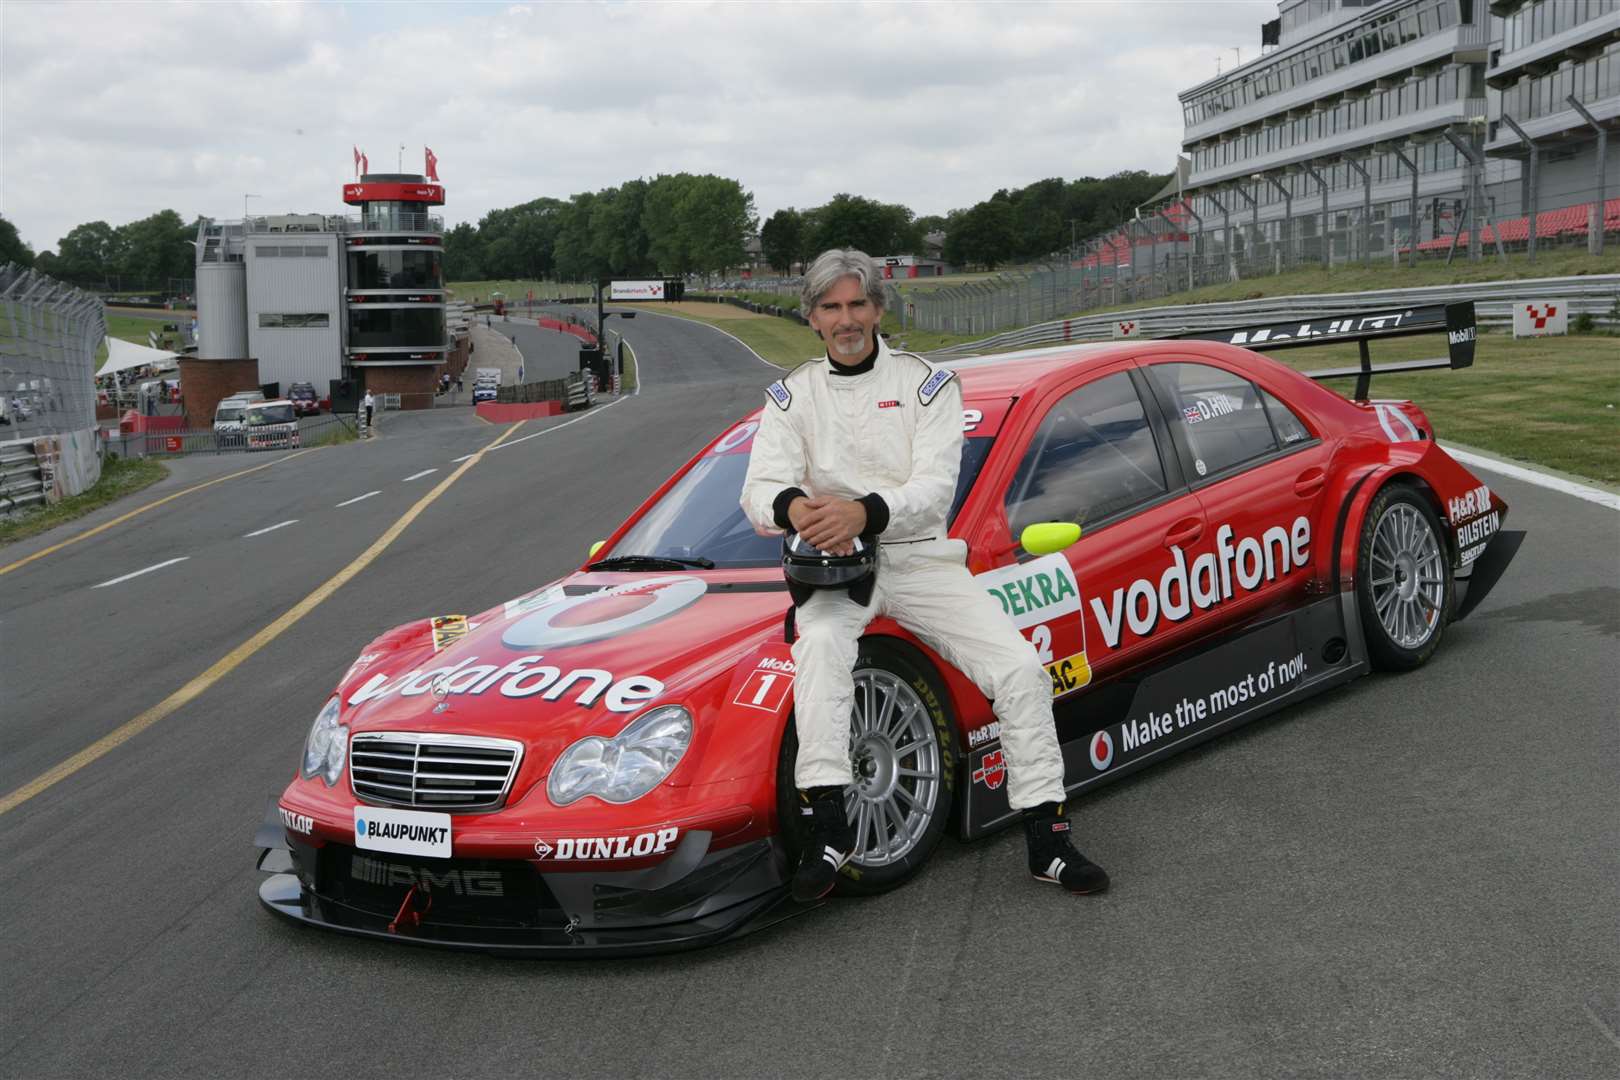 Damon at Brands Hatch in 2006 ahead of the West Kingsdown circuit's inaugural DTM event. Before getting into car racing, he took part in his first-ever motorbike race at Lydden Hill in June 1979